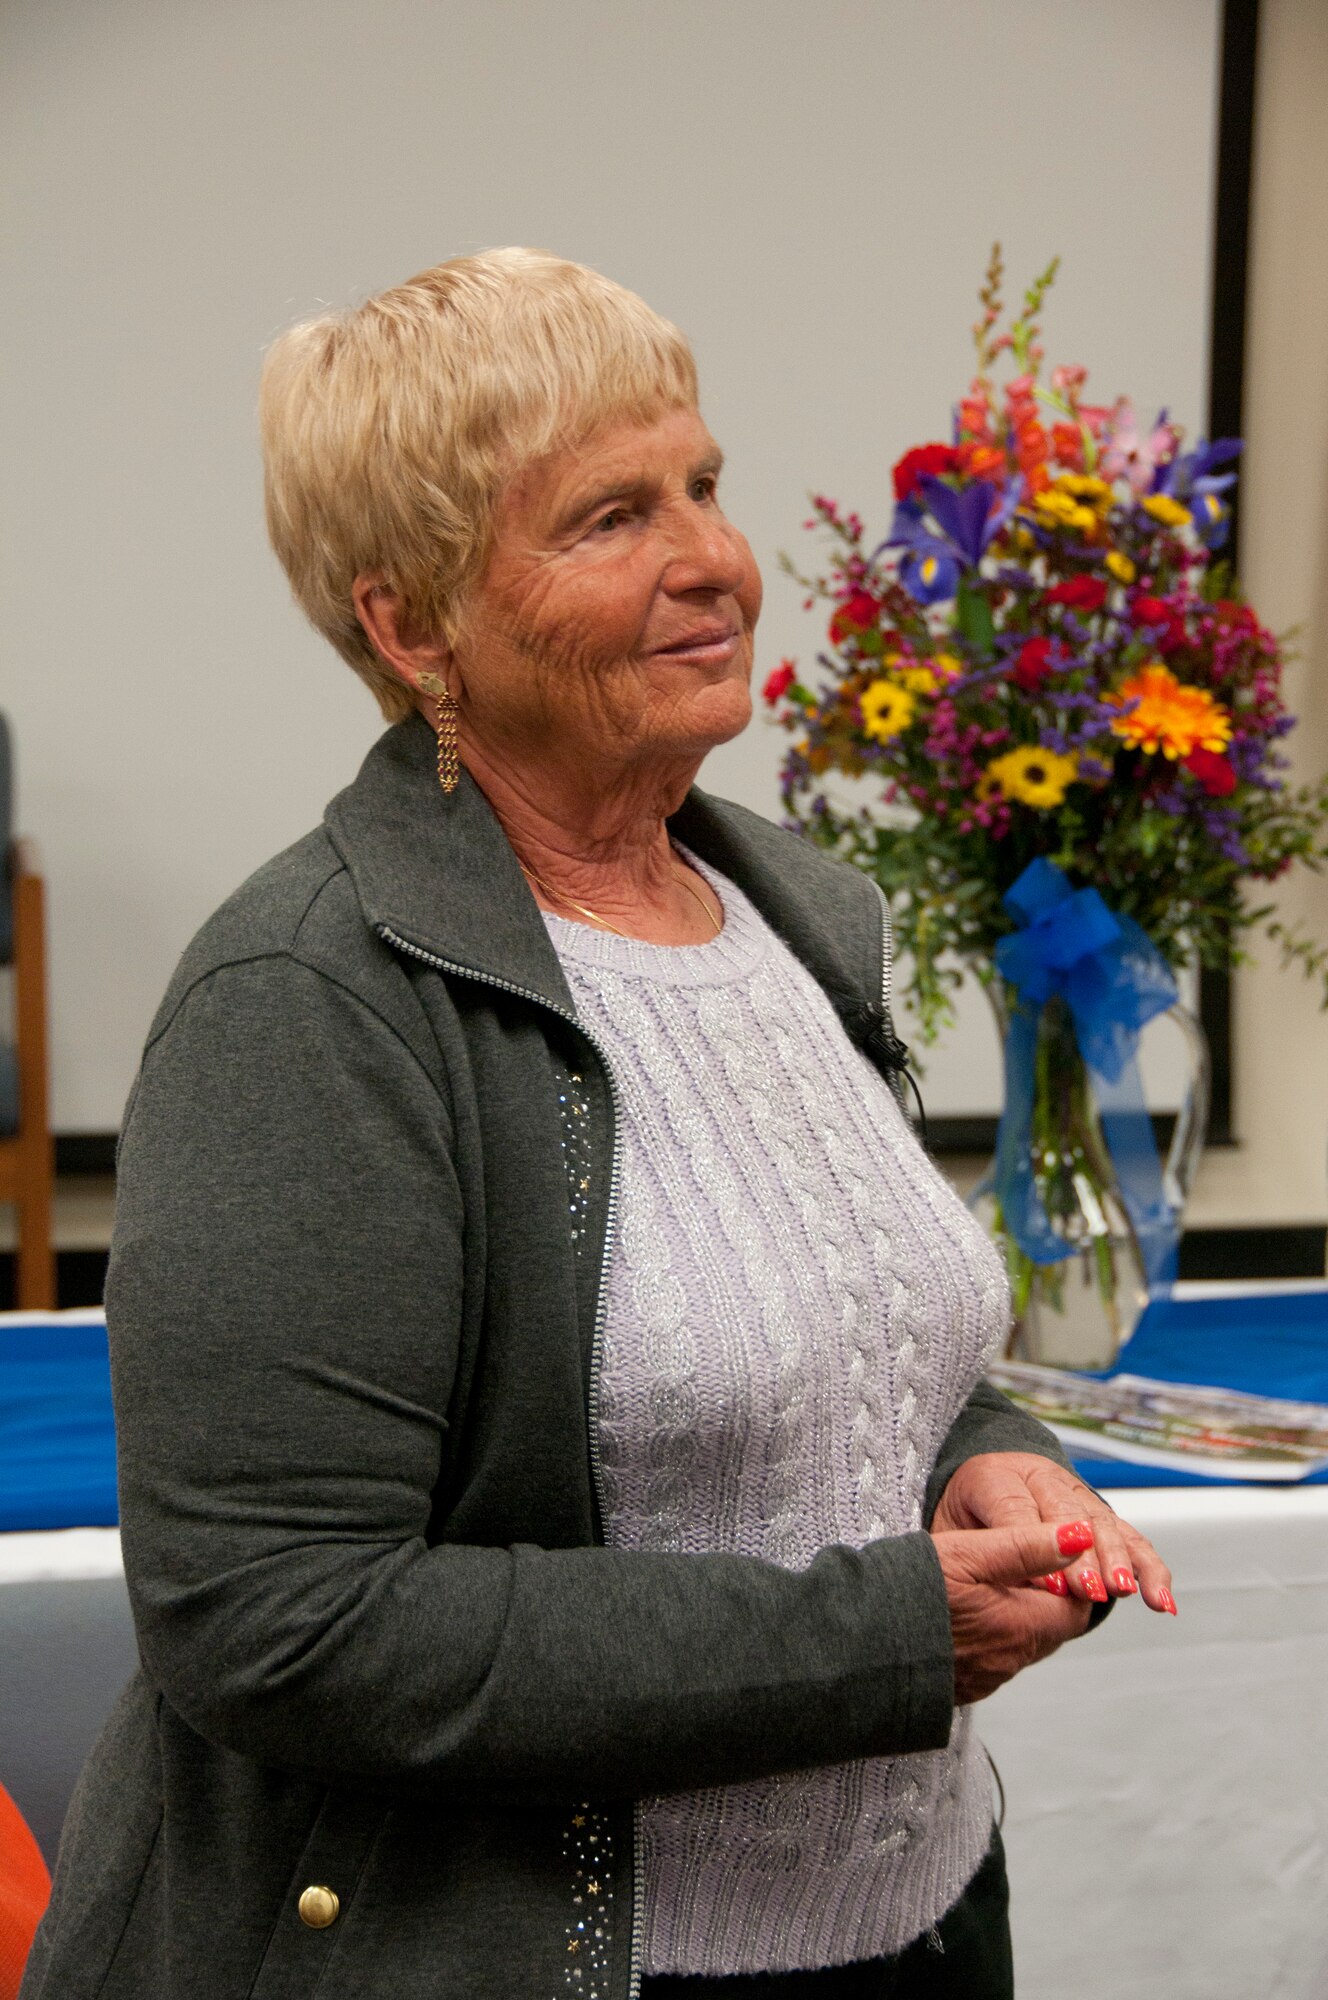 Wanda Wolosky, one of a few remaining holocaust survivors, visited the 162 Fighter Wing April 11 to share with unit members the stories of her childhood as a Jewish girl in the Warsaw Ghetto during World War II.